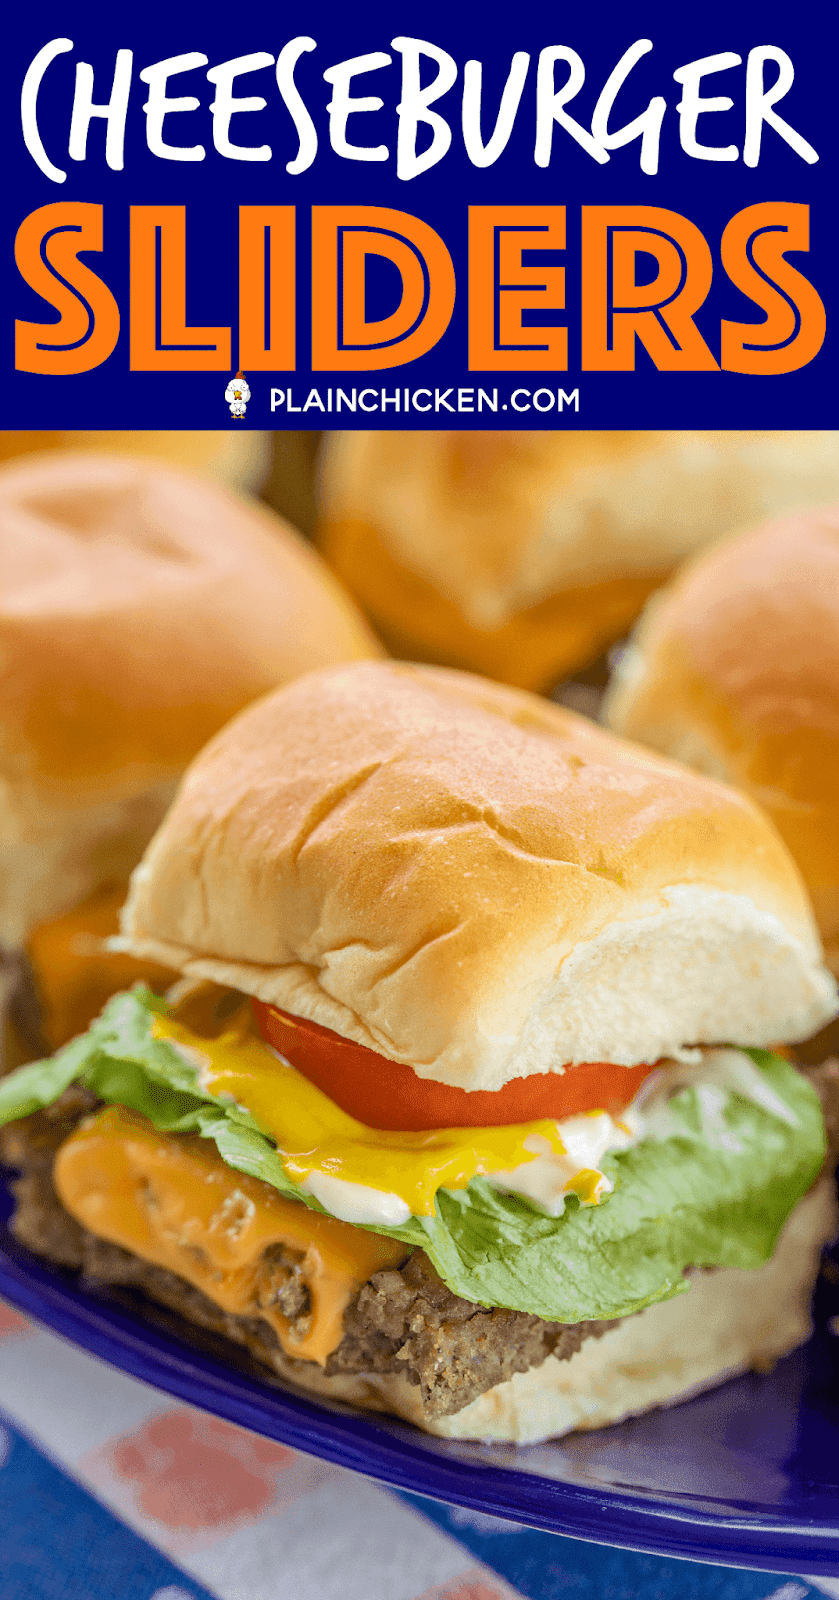 Cheeseburger Sliders - only 5 ingredients!! Ground beef, sausage, ranch dressing mix, cheese and buns. PERFECT for tailgating and parties!! Can make ahead of time and heat in the oven or on top of the grill when ready to serve. Top with your favorite burger toppings - lettuce, tomato, bacon, pickles, mayo, ketchup, mustard. SO easy and SOOOO good!!! Seriously our favorite burger recipe! #tailgating #burgers #beef #partyfood